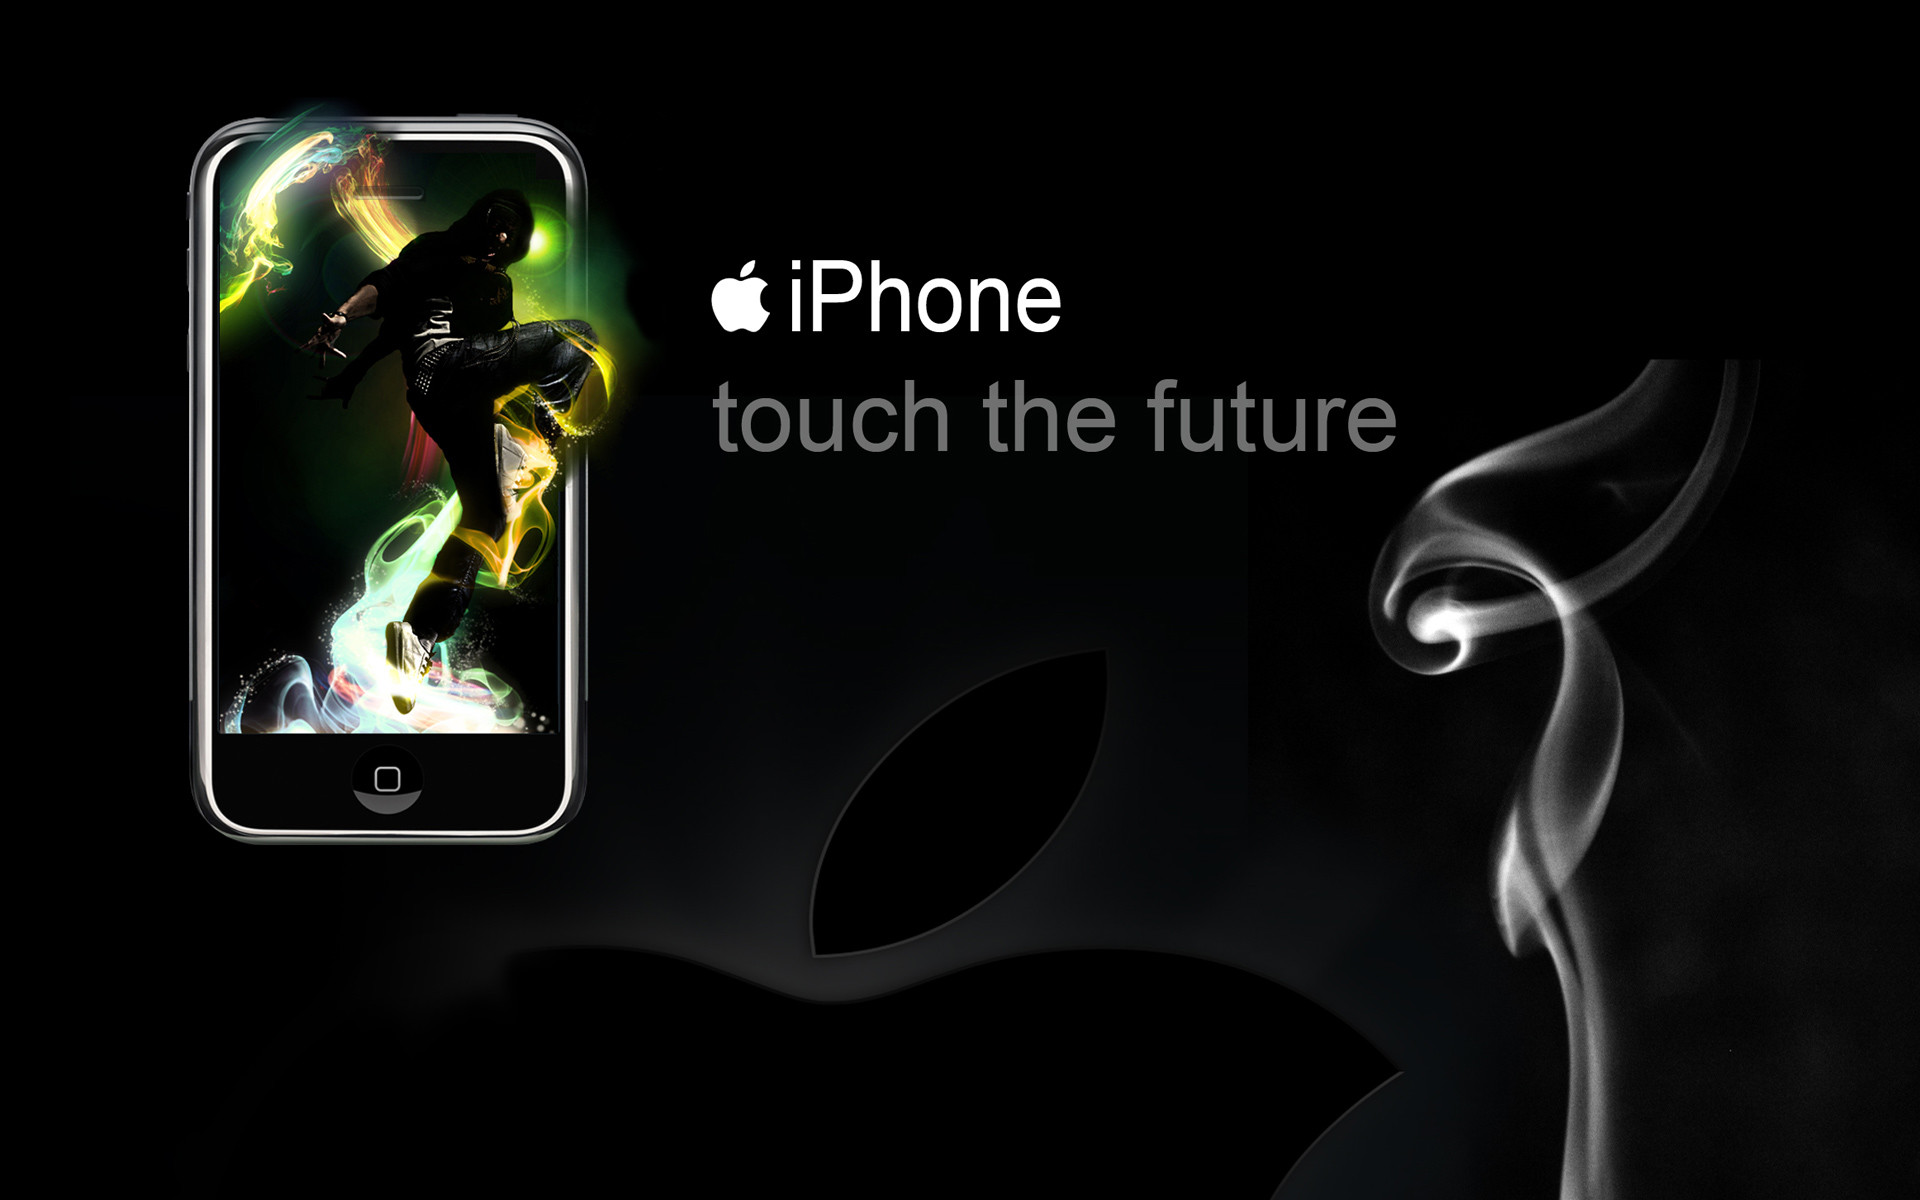 1920x1200 IPhone Touch the Future wallpapers (57 Wallpapers)